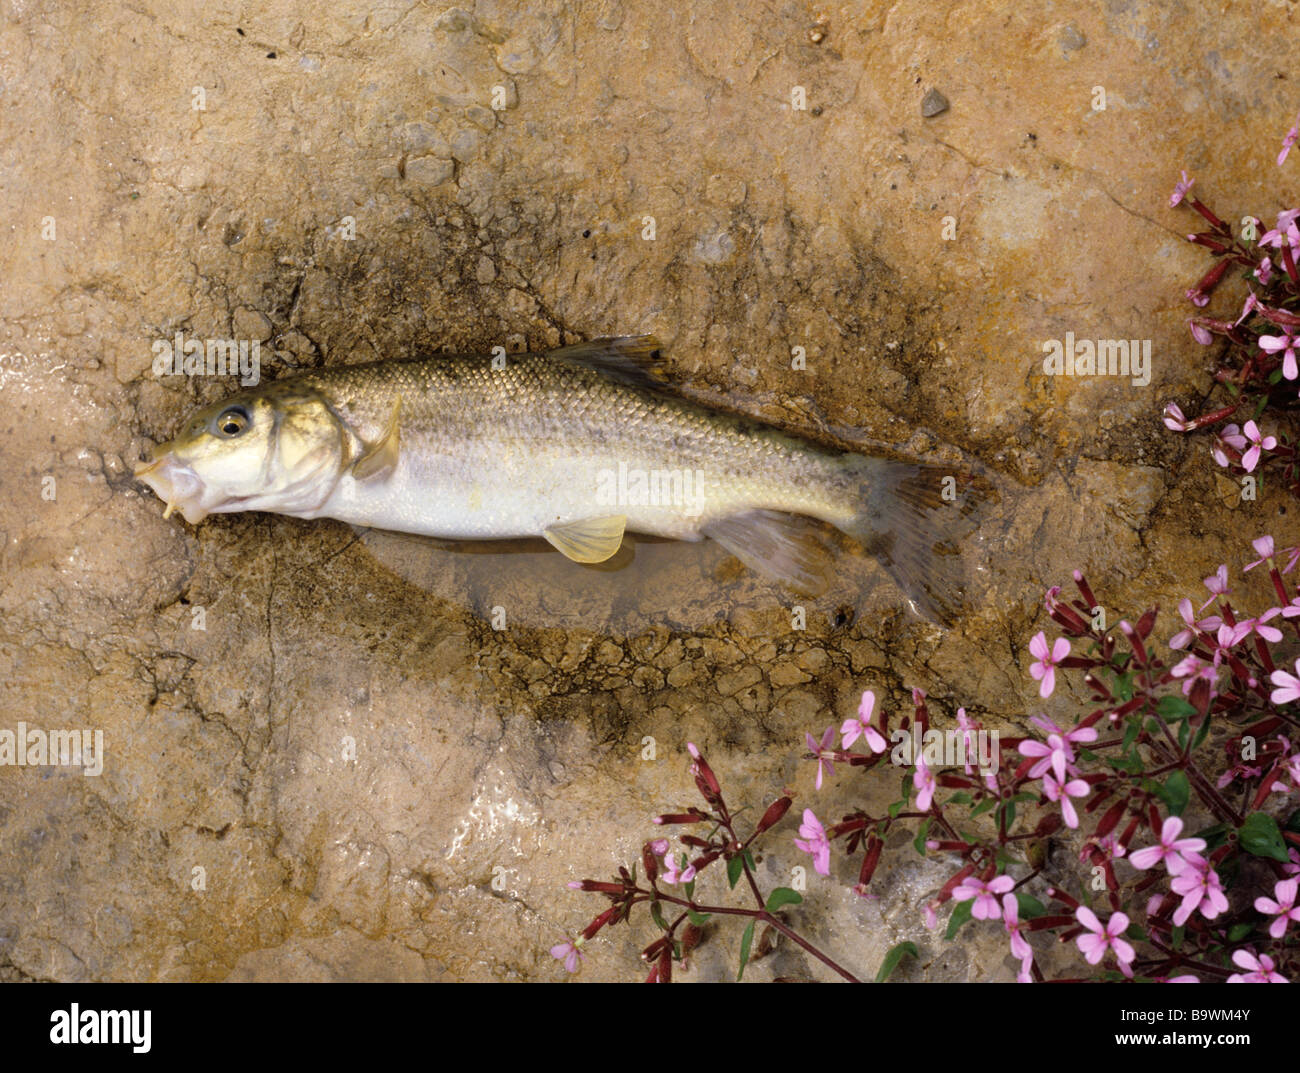 Mediterranean Barbel Barbus meridionalis from the tiny tributary of Ardeche with soapwort flowers Stock Photo